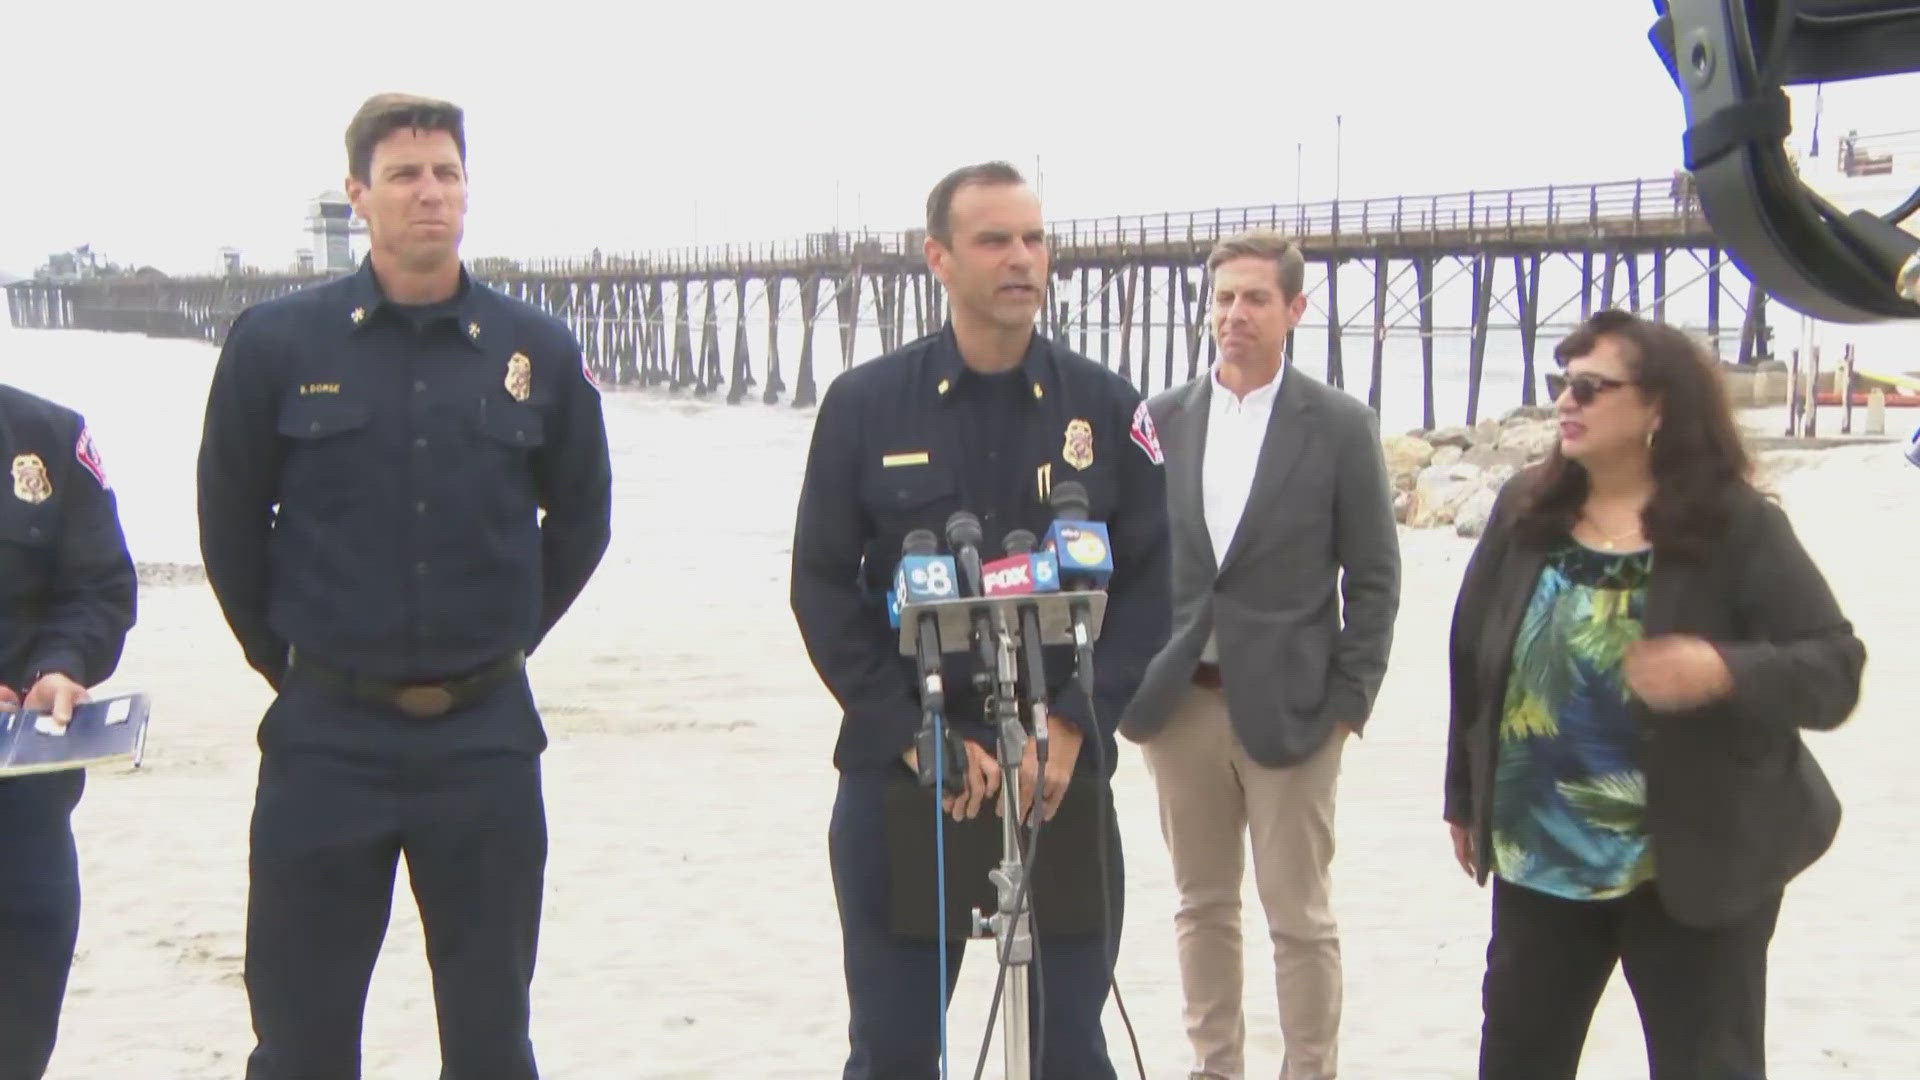 Oceanside Fire Department officials, along with state and local leaders give an update on the Oceanside Pier fire.